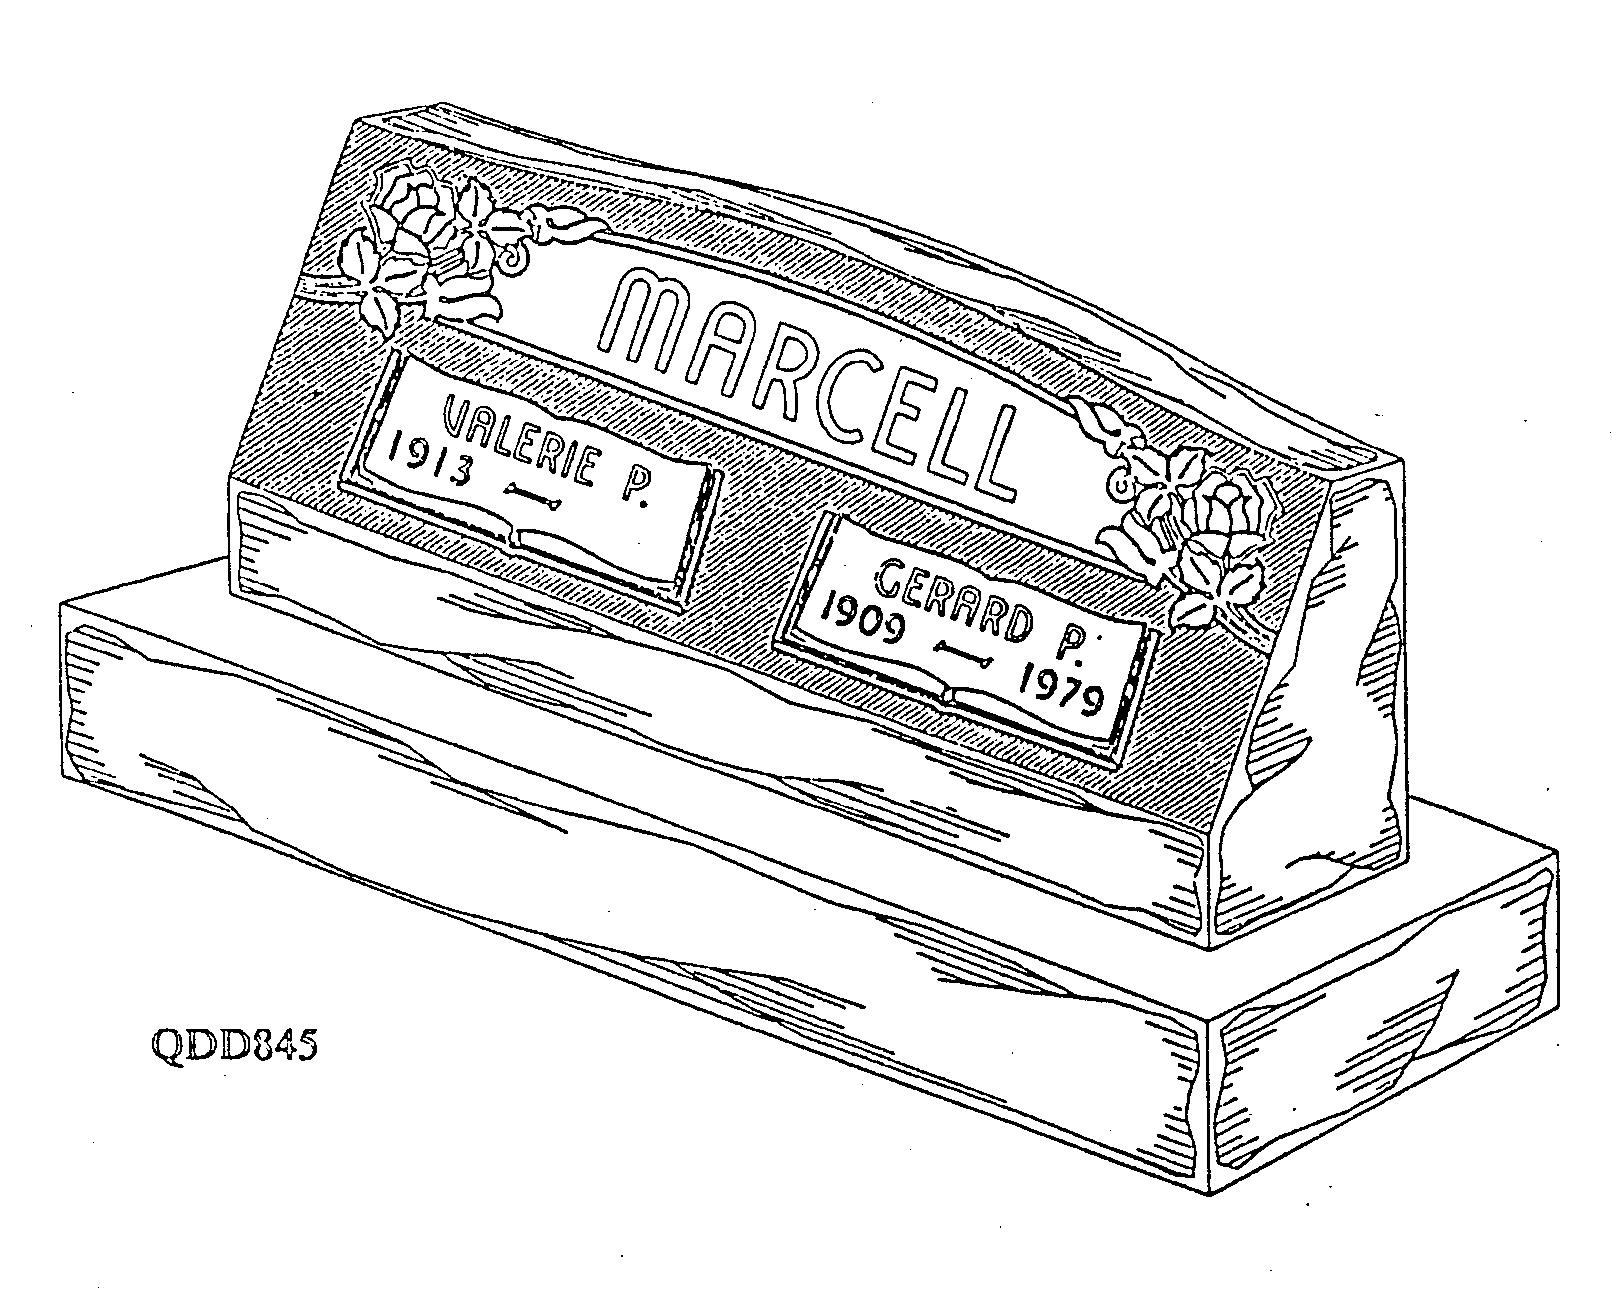 a black and white drawing of a gravestone for marcel